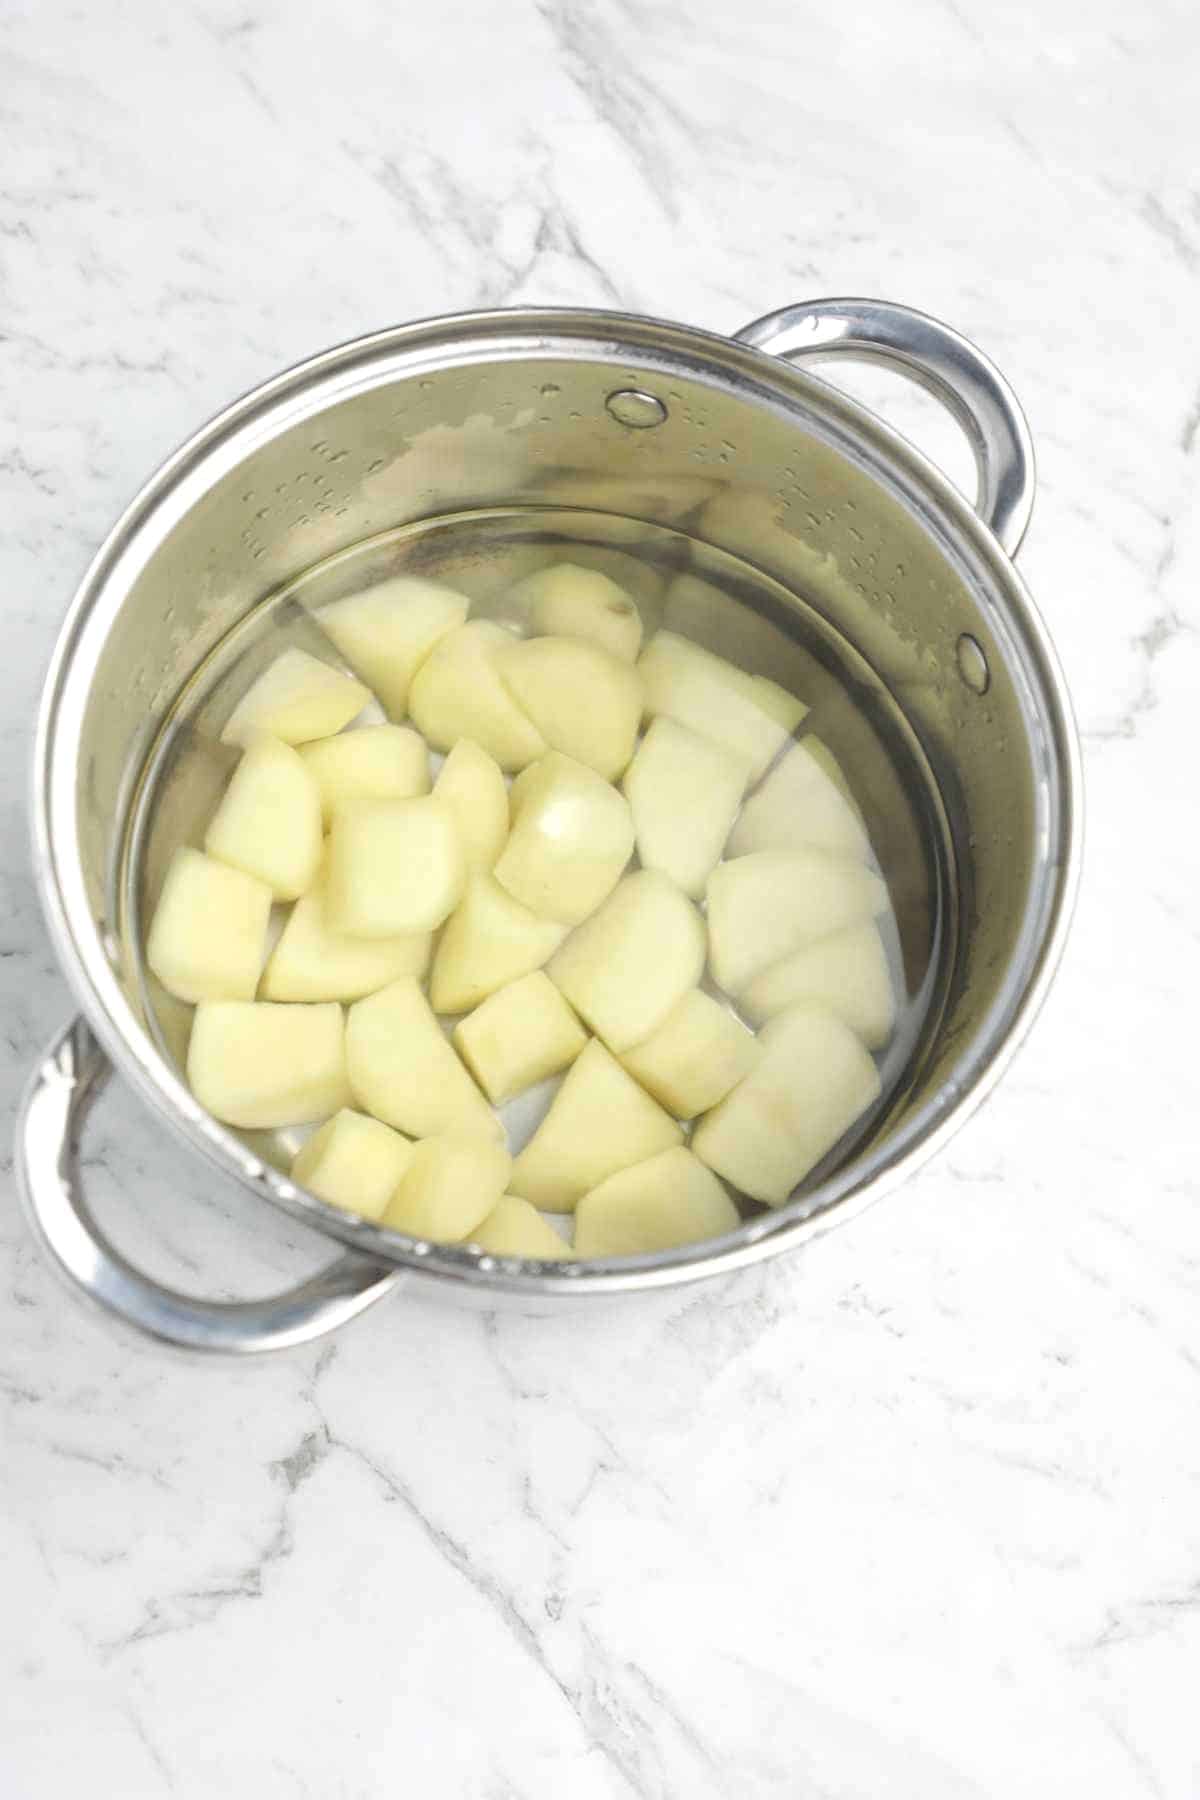 Potatoes soaked in water in a pot.